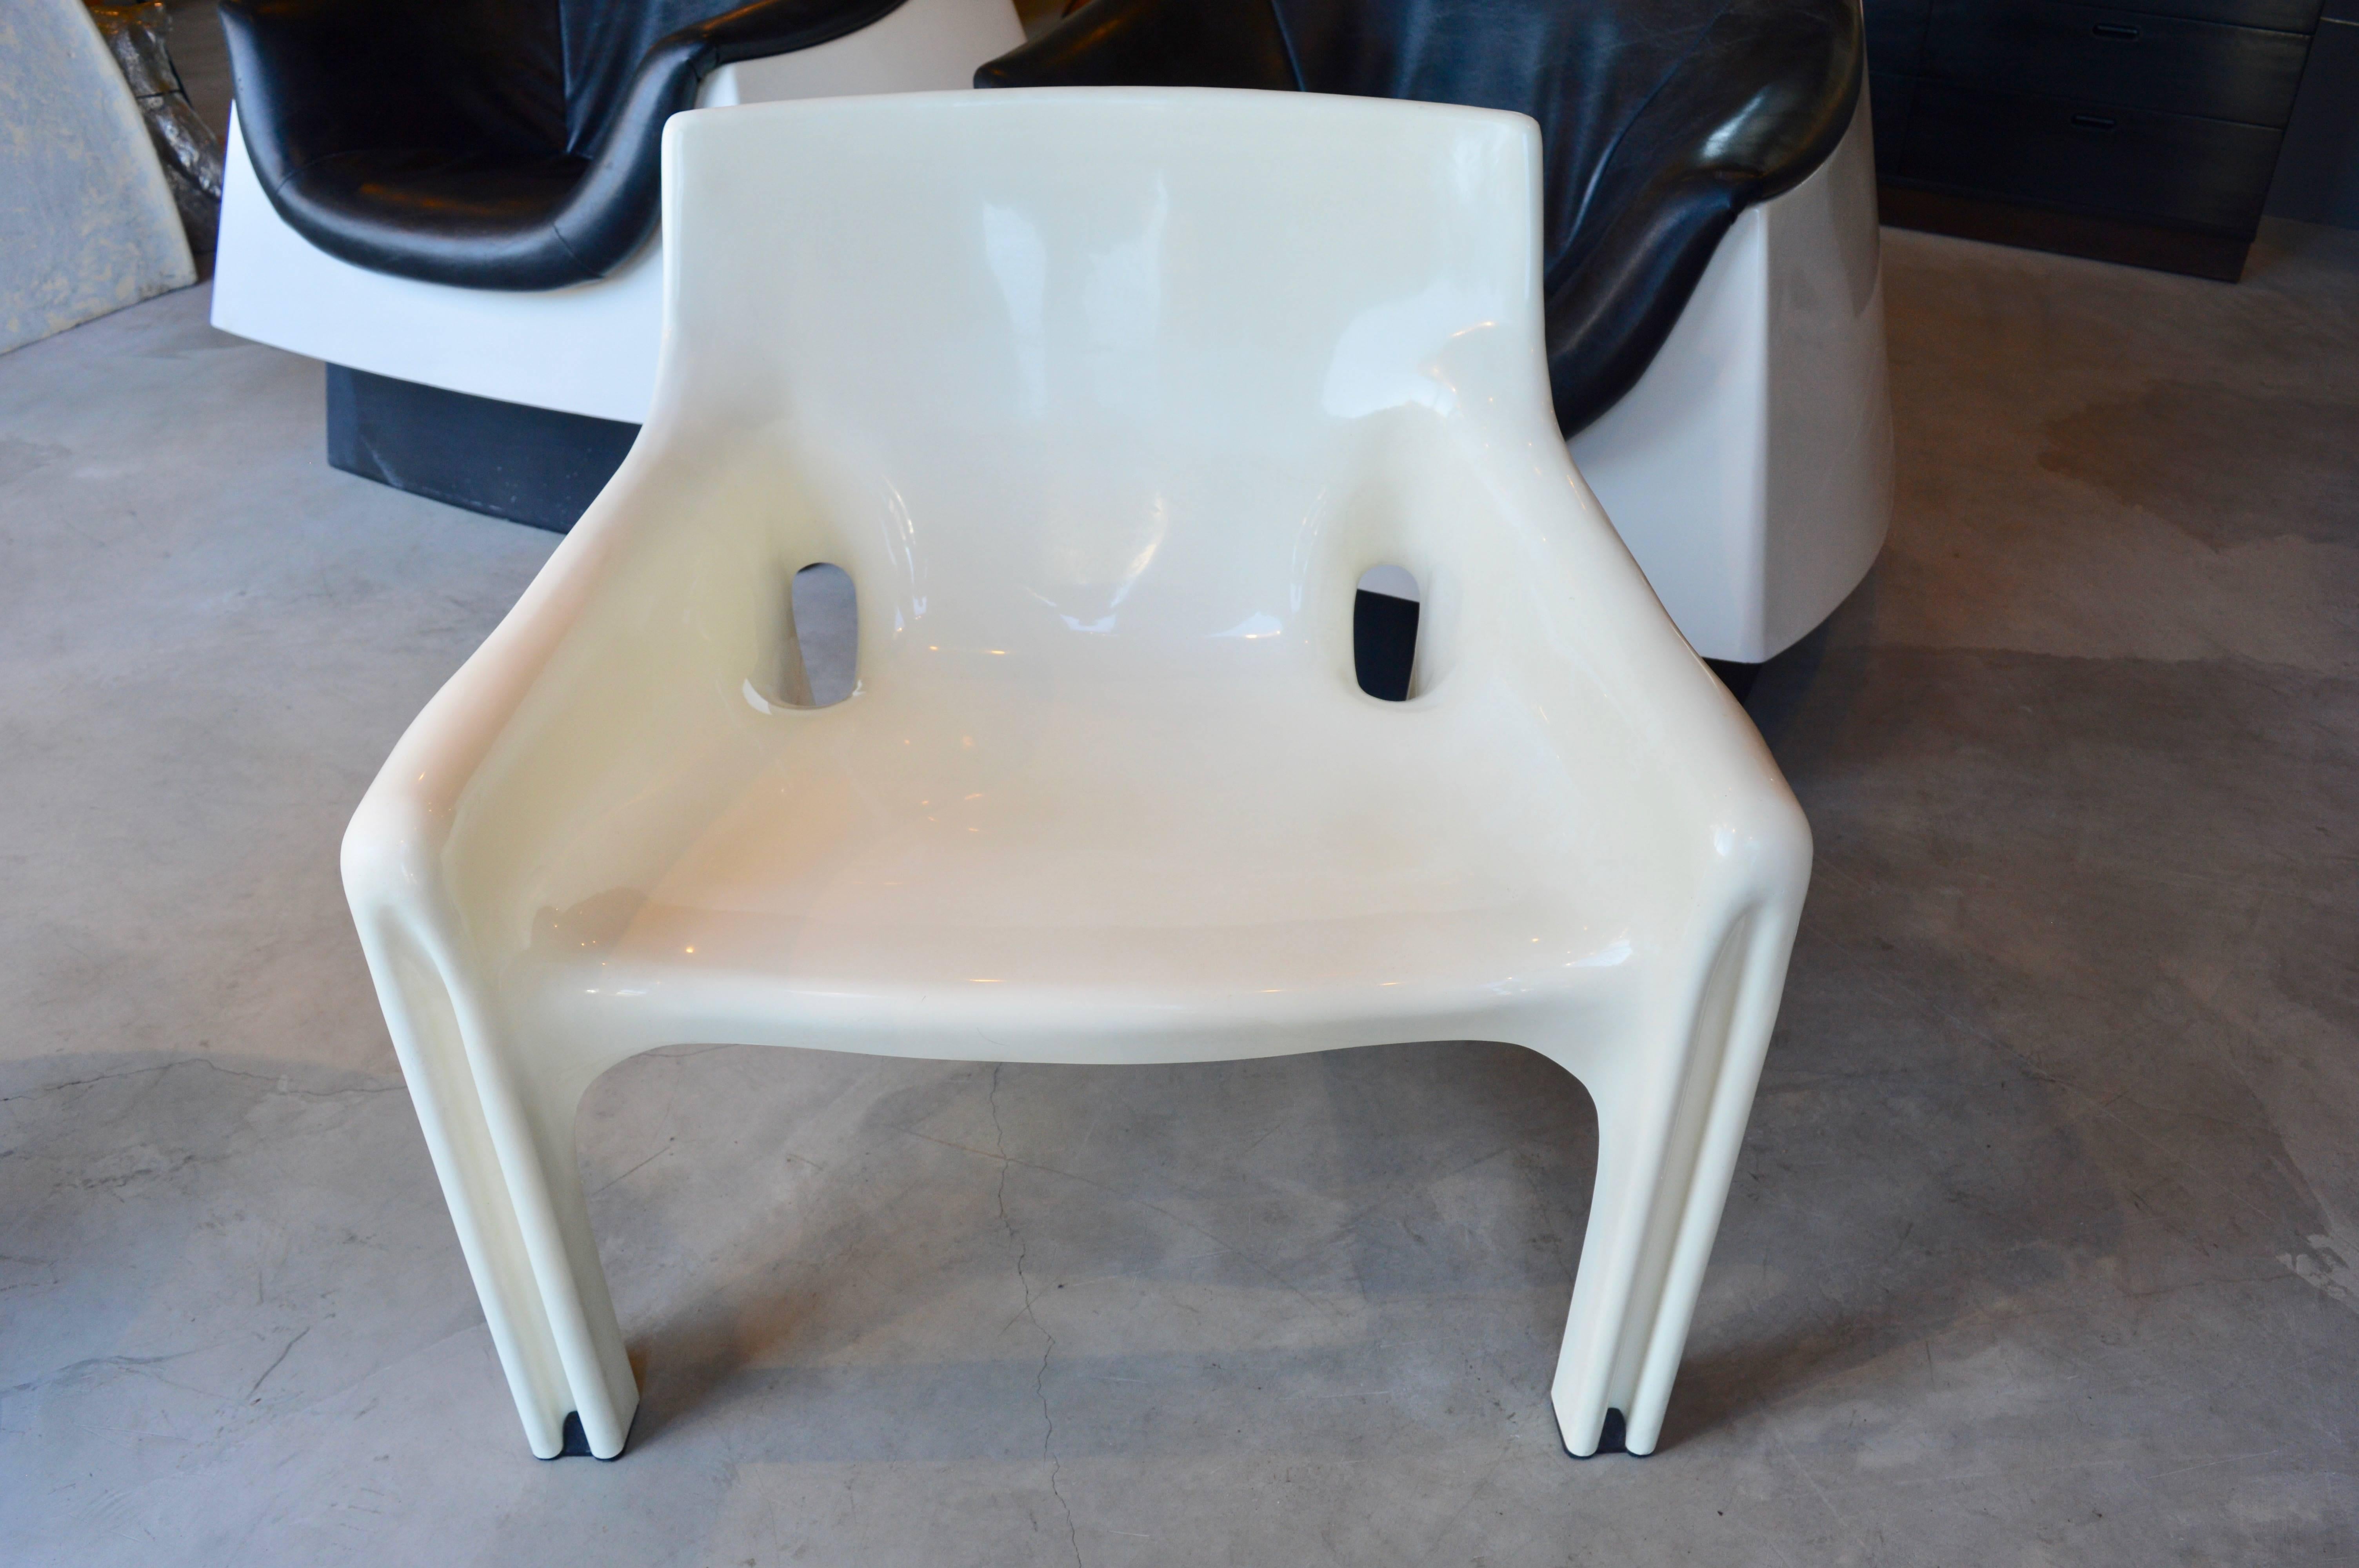 Pair of ivory fiberglass and plastic armchairs by Italian designer Vico Magistretti. The style name is 